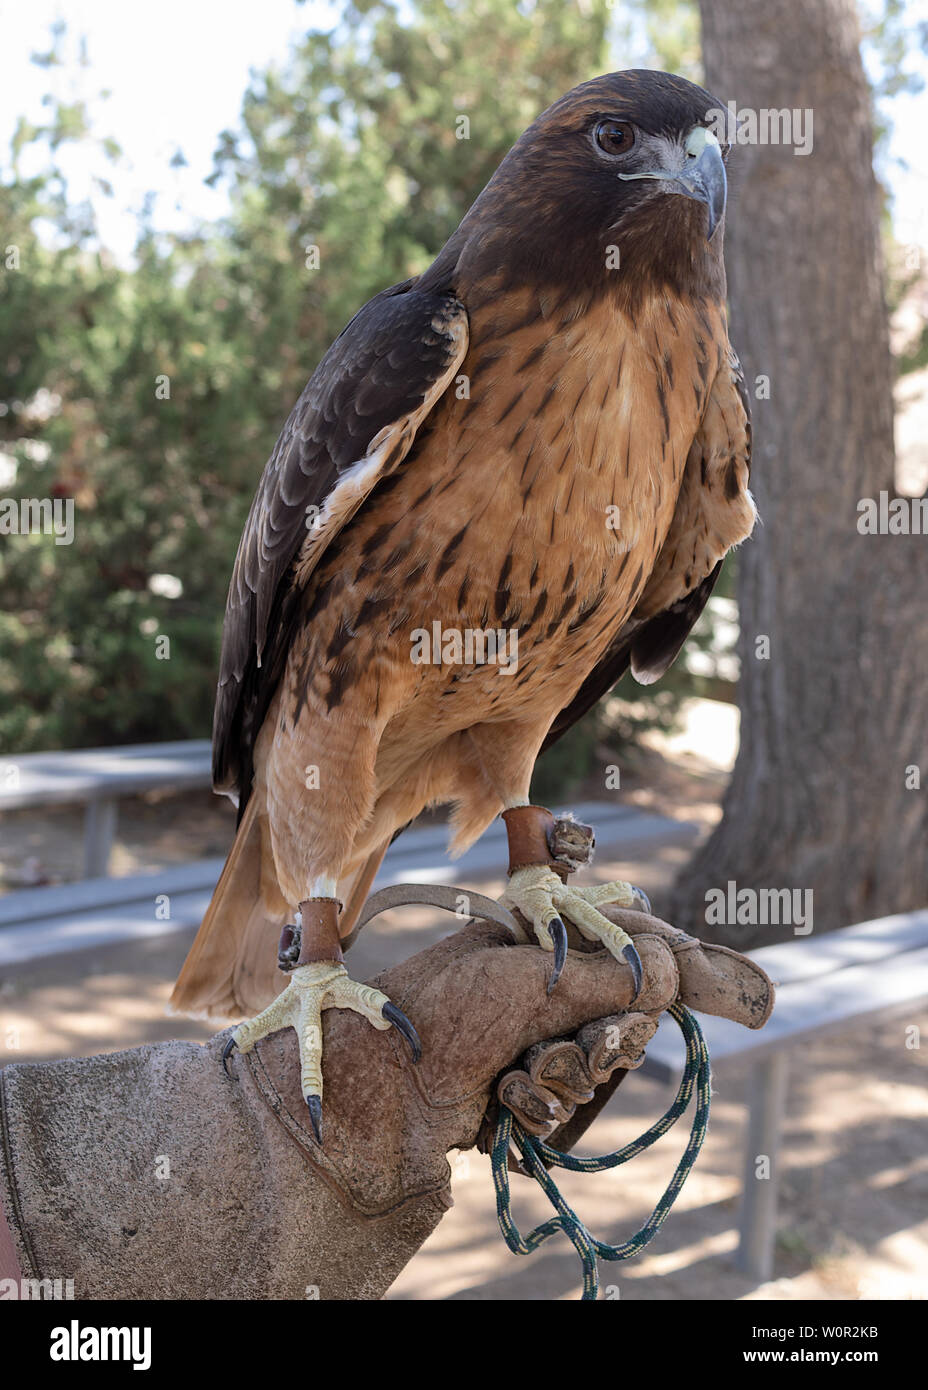 Image showing an injured red-tailed hawk at the Vasquez Rocks Natural Area and Nature Center. Stock Photo